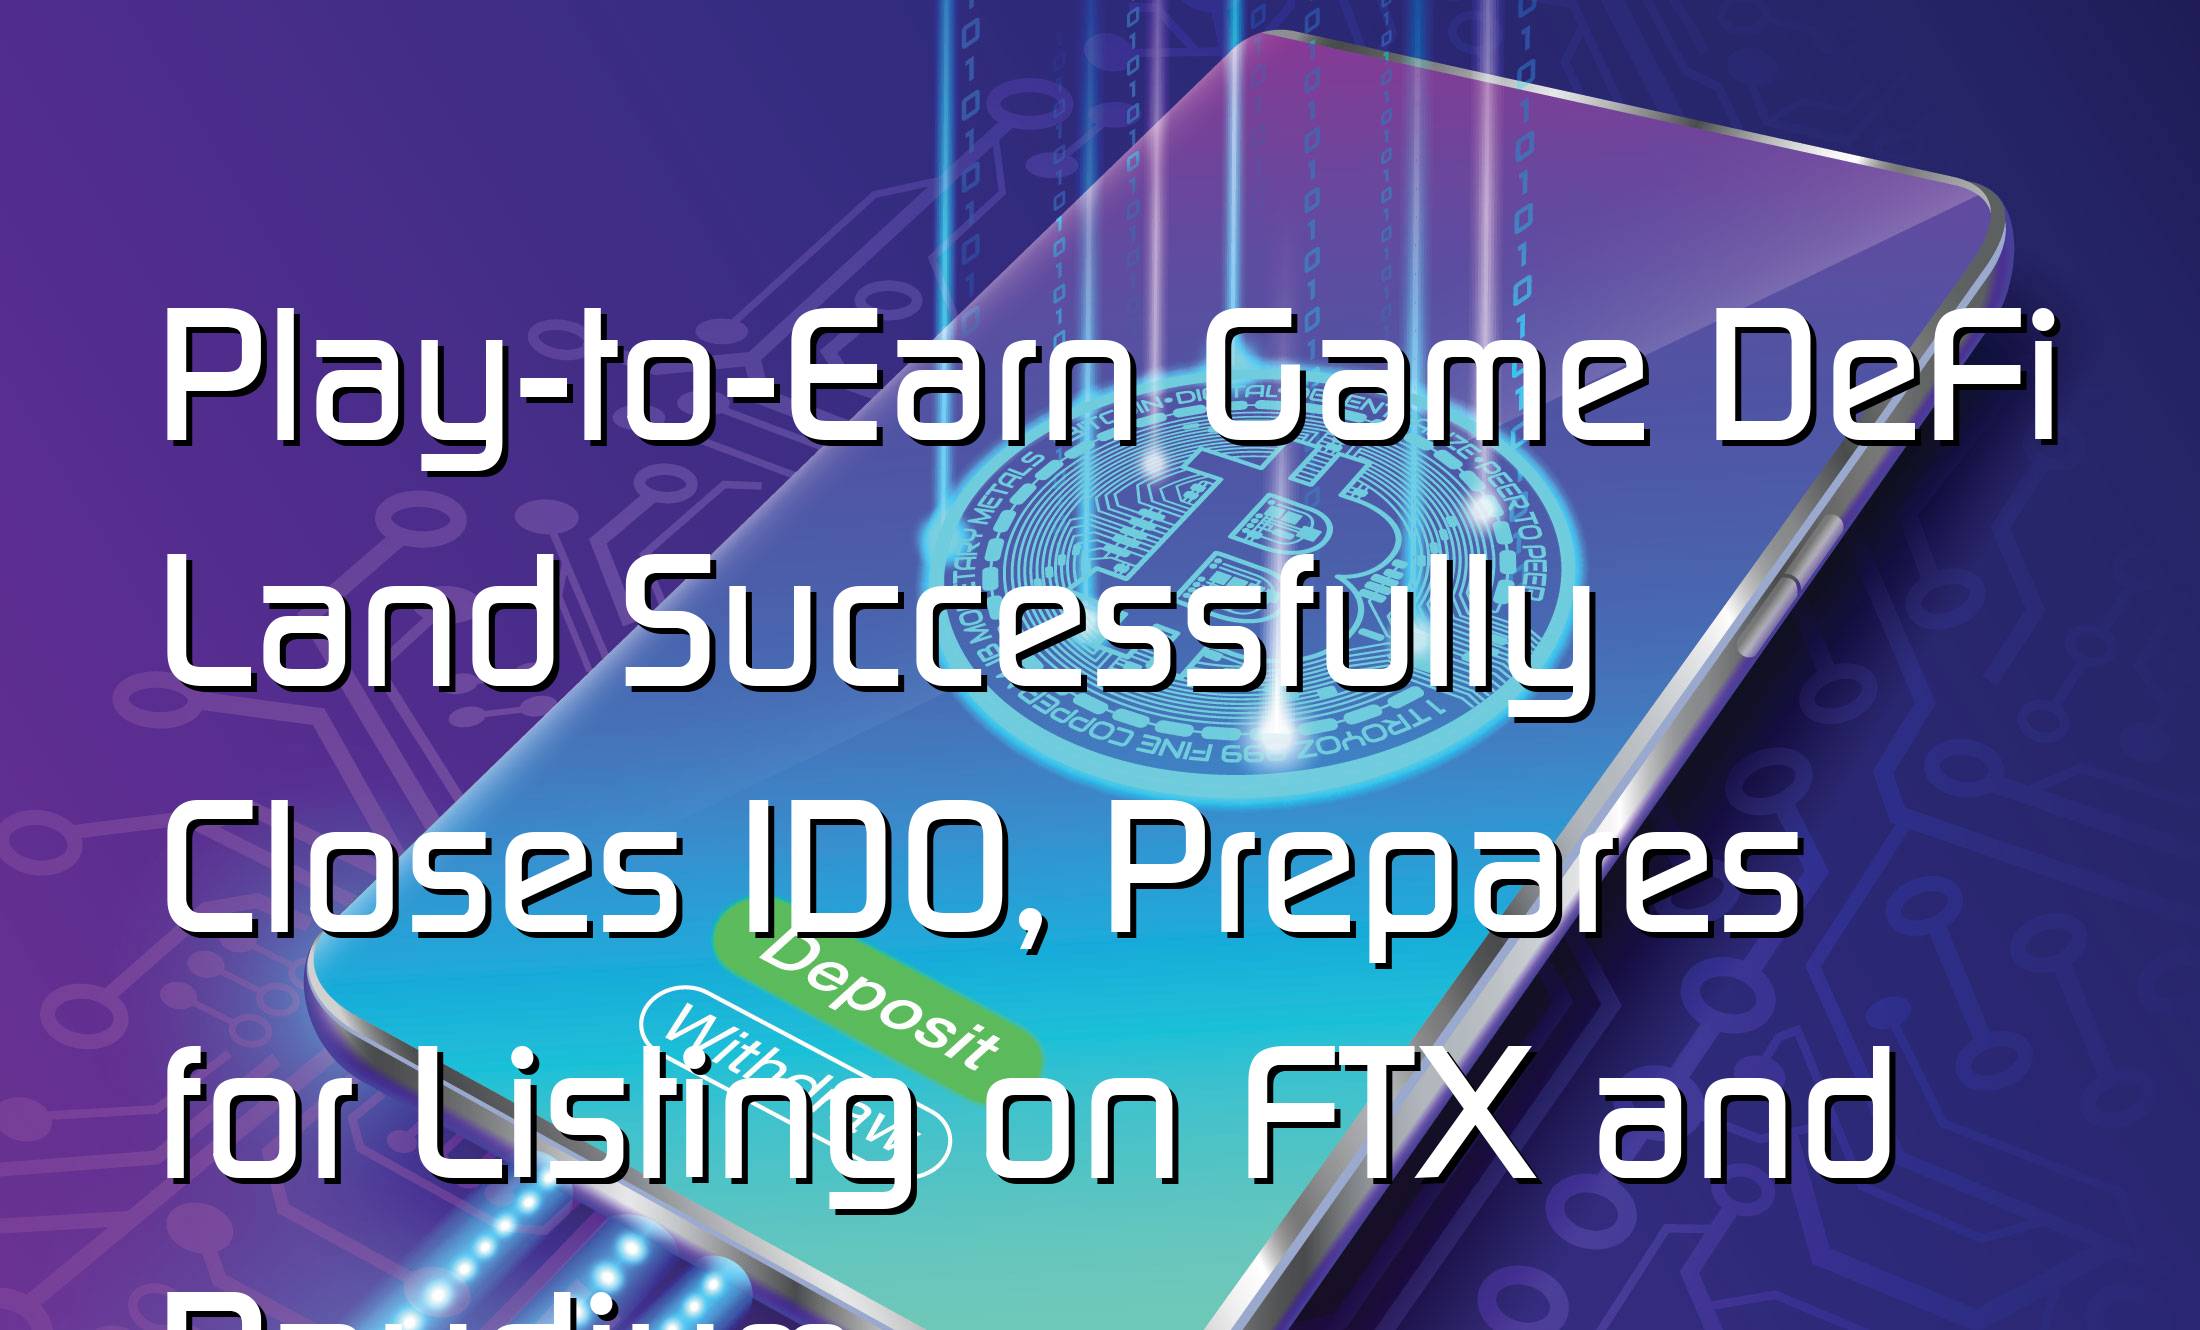 @$54409: Play-to-Earn Game DeFi Land Successfully Closes IDO, Prepares for Listing on FTX and Raydium